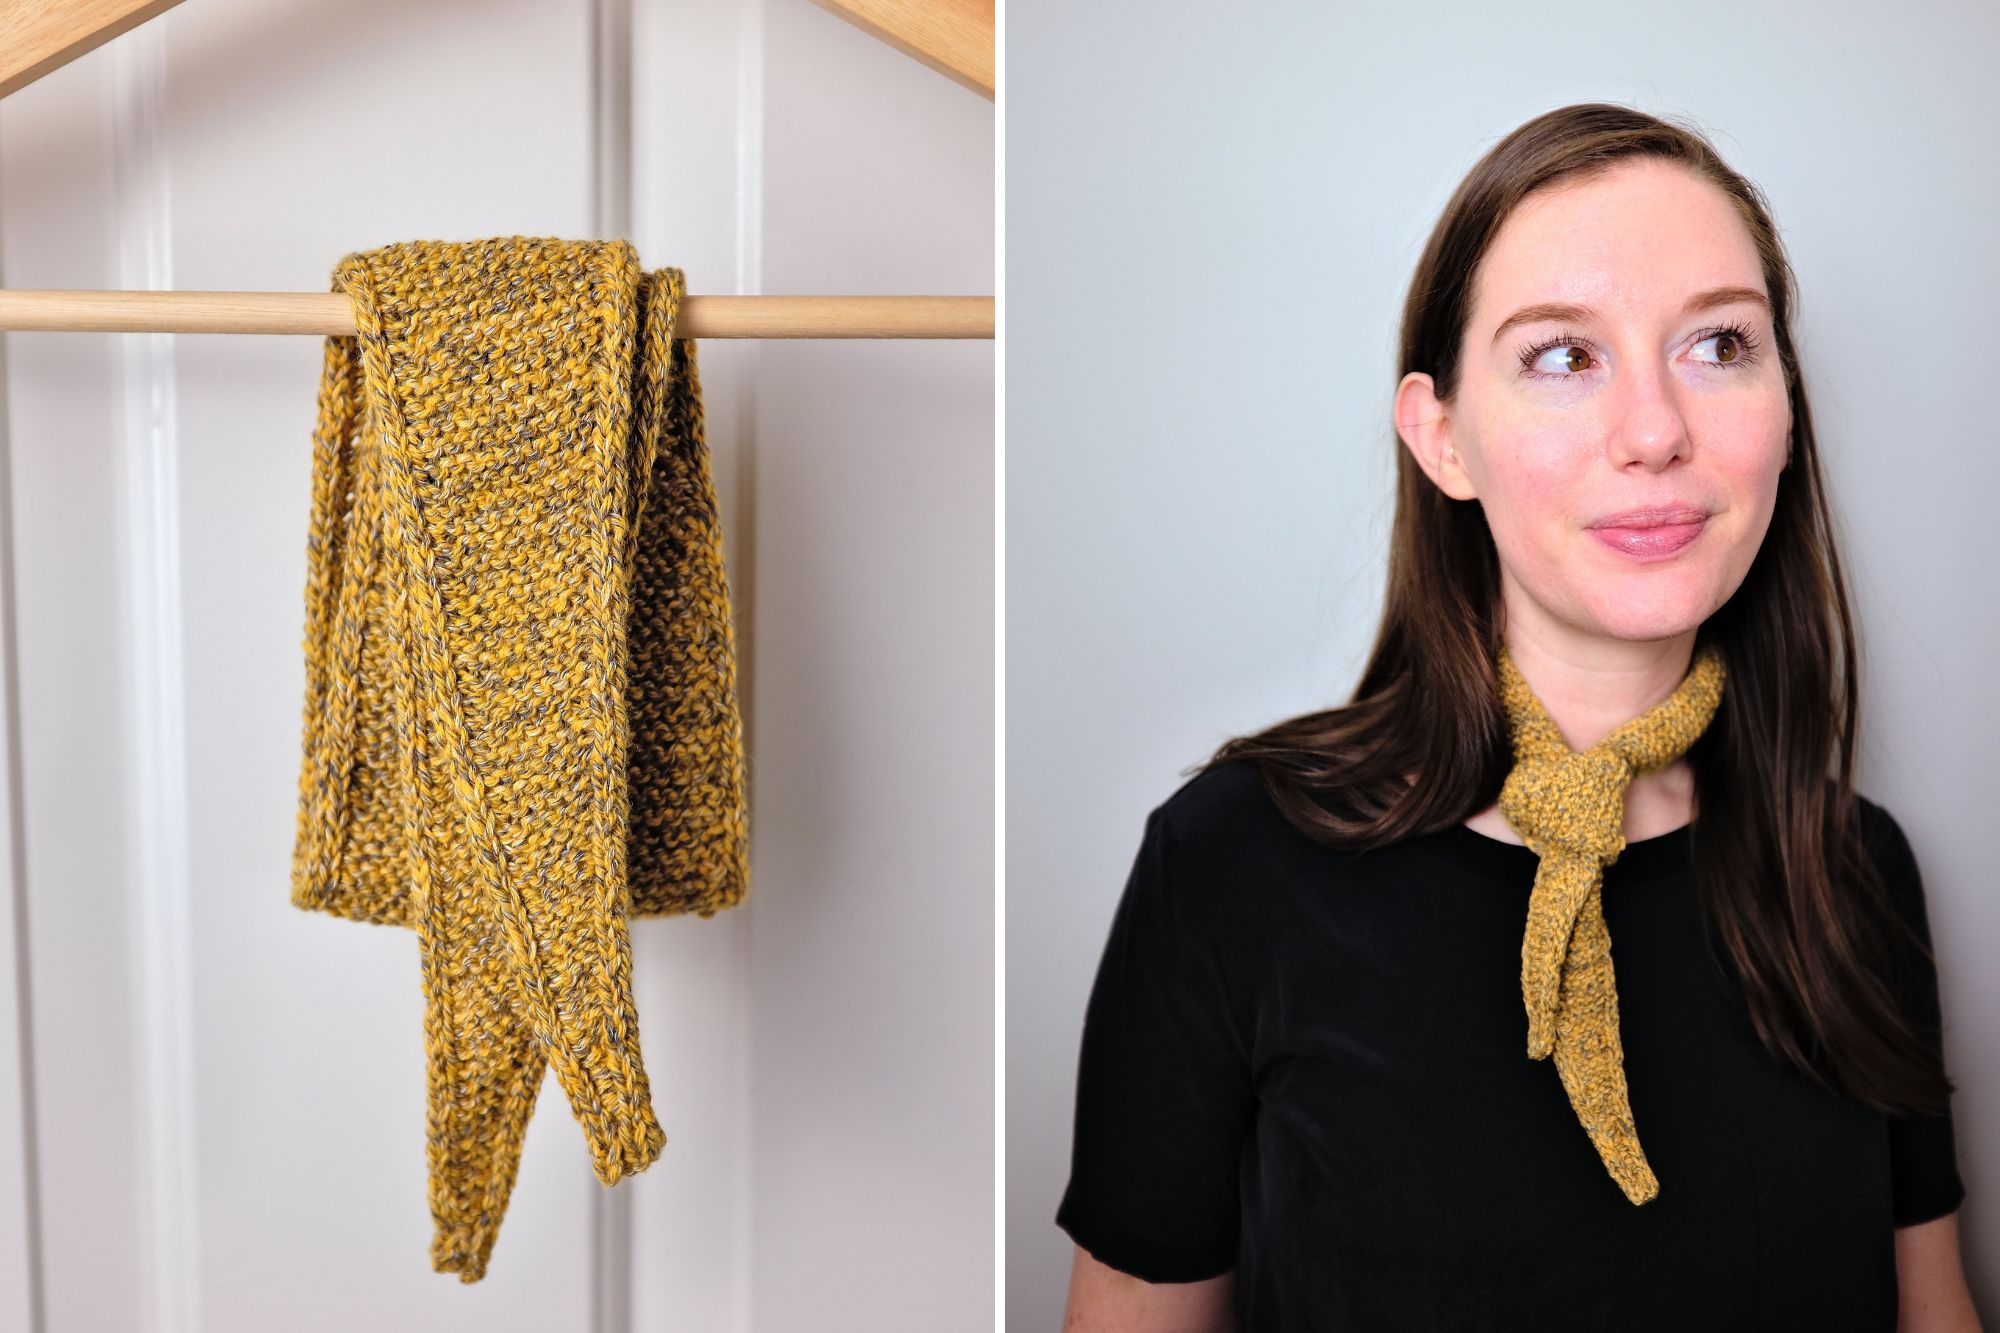 Two images: the Sophie Scarf in a mustard color hanging on a hanger; Alyssa wearing the Sophie Scarf